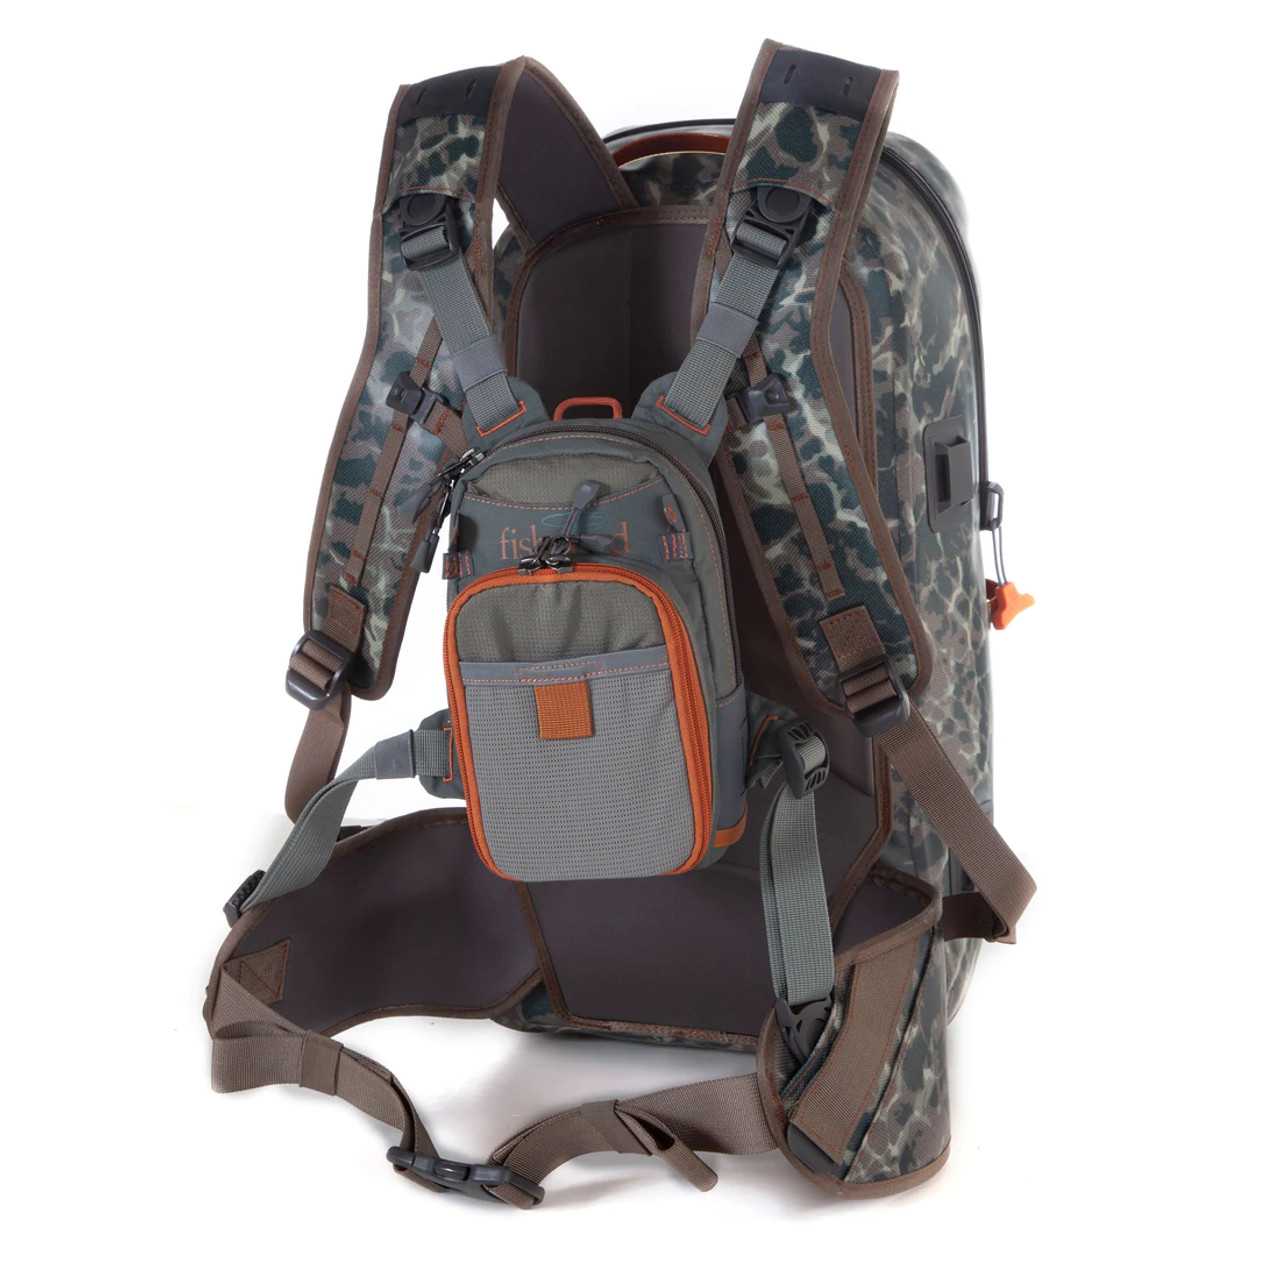 FISHPOND THUNDERHEAD SUBMERSIBLE BACKPACK - FRED'S CUSTOM TACKLE